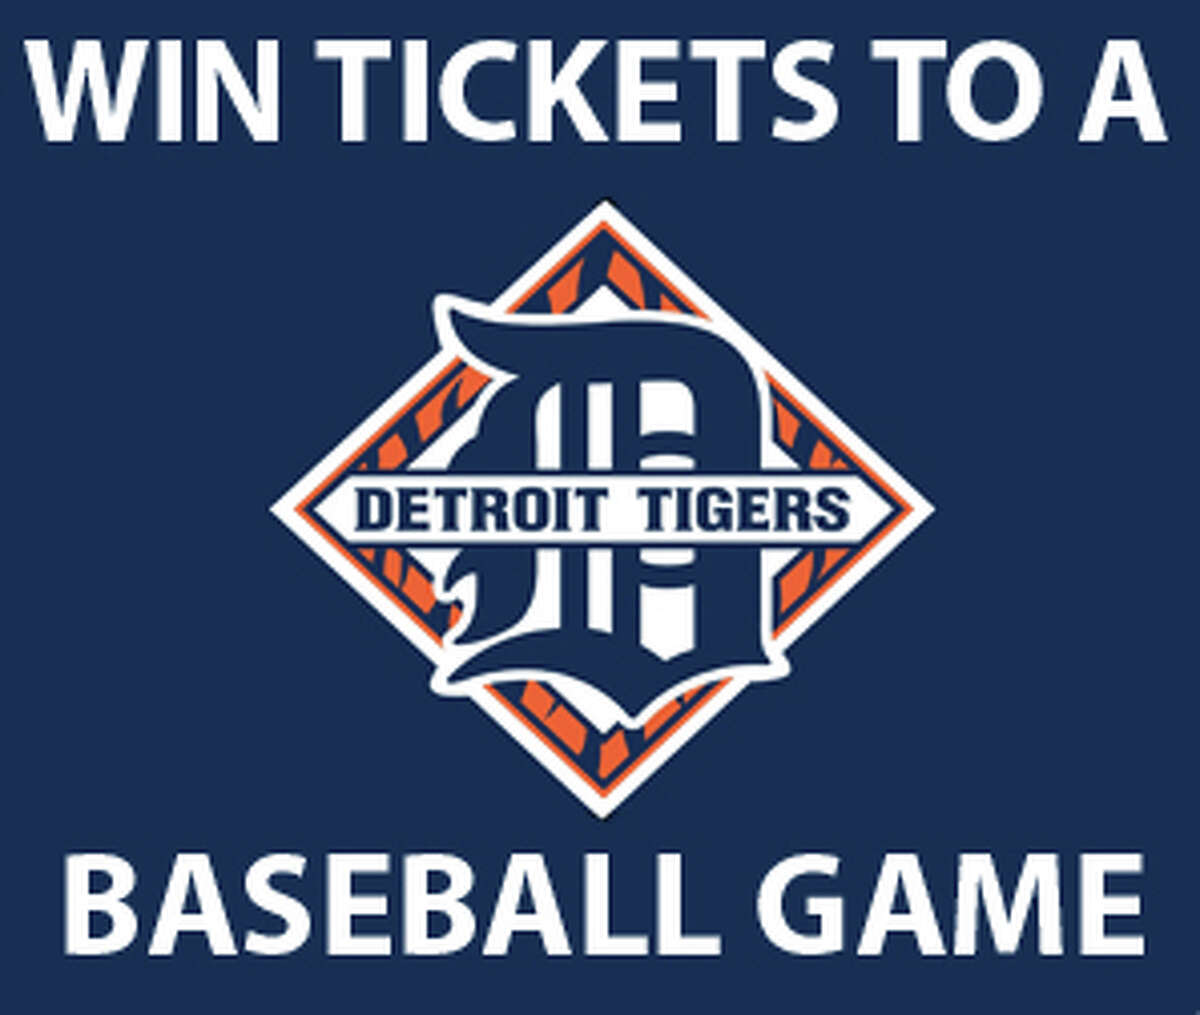 Detroit Tigers on X: RETWEET for your chance to win this